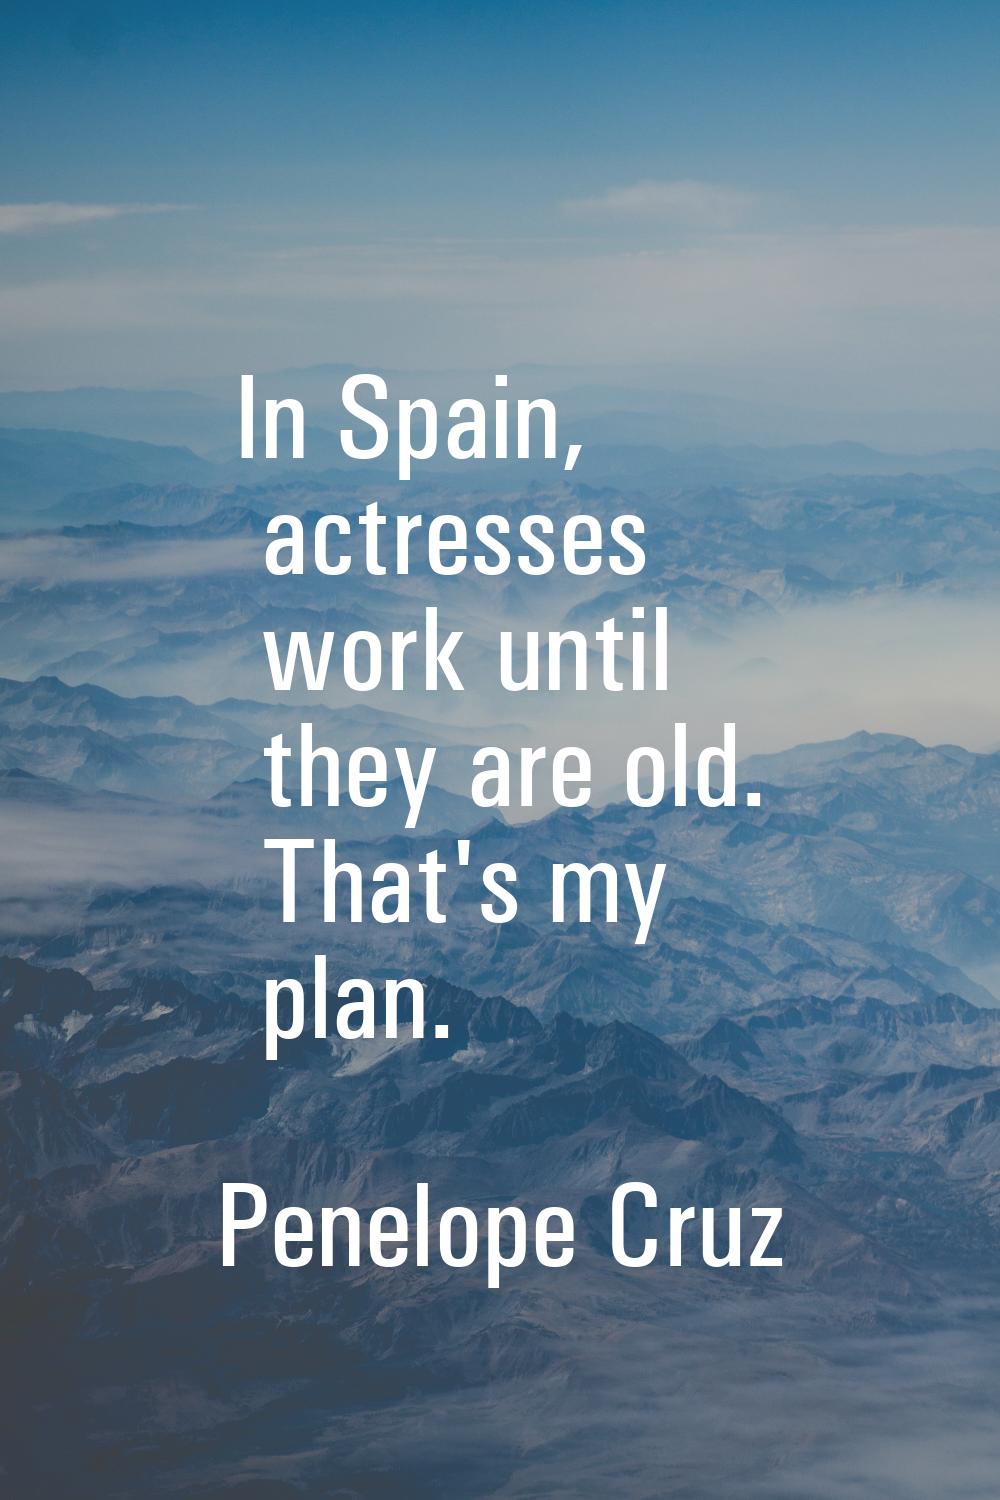 In Spain, actresses work until they are old. That's my plan.